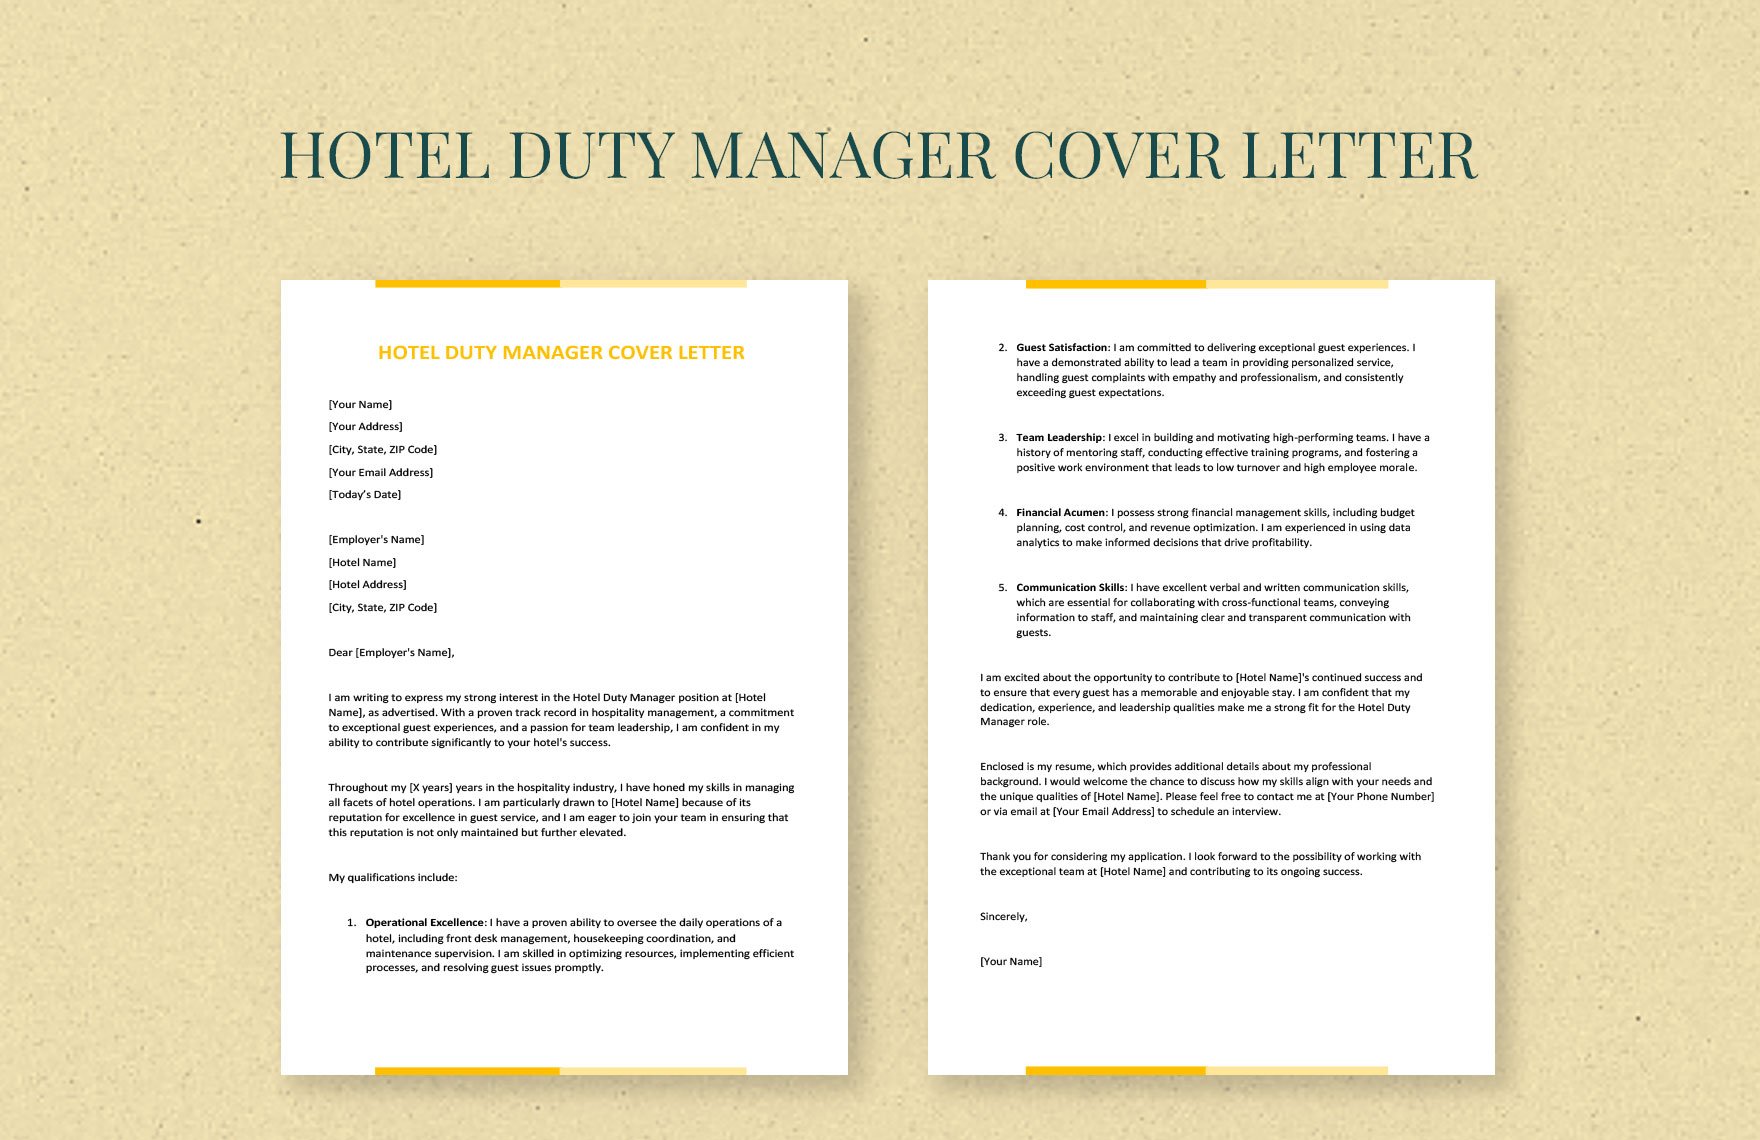 Hotel Duty Manager Cover Letter